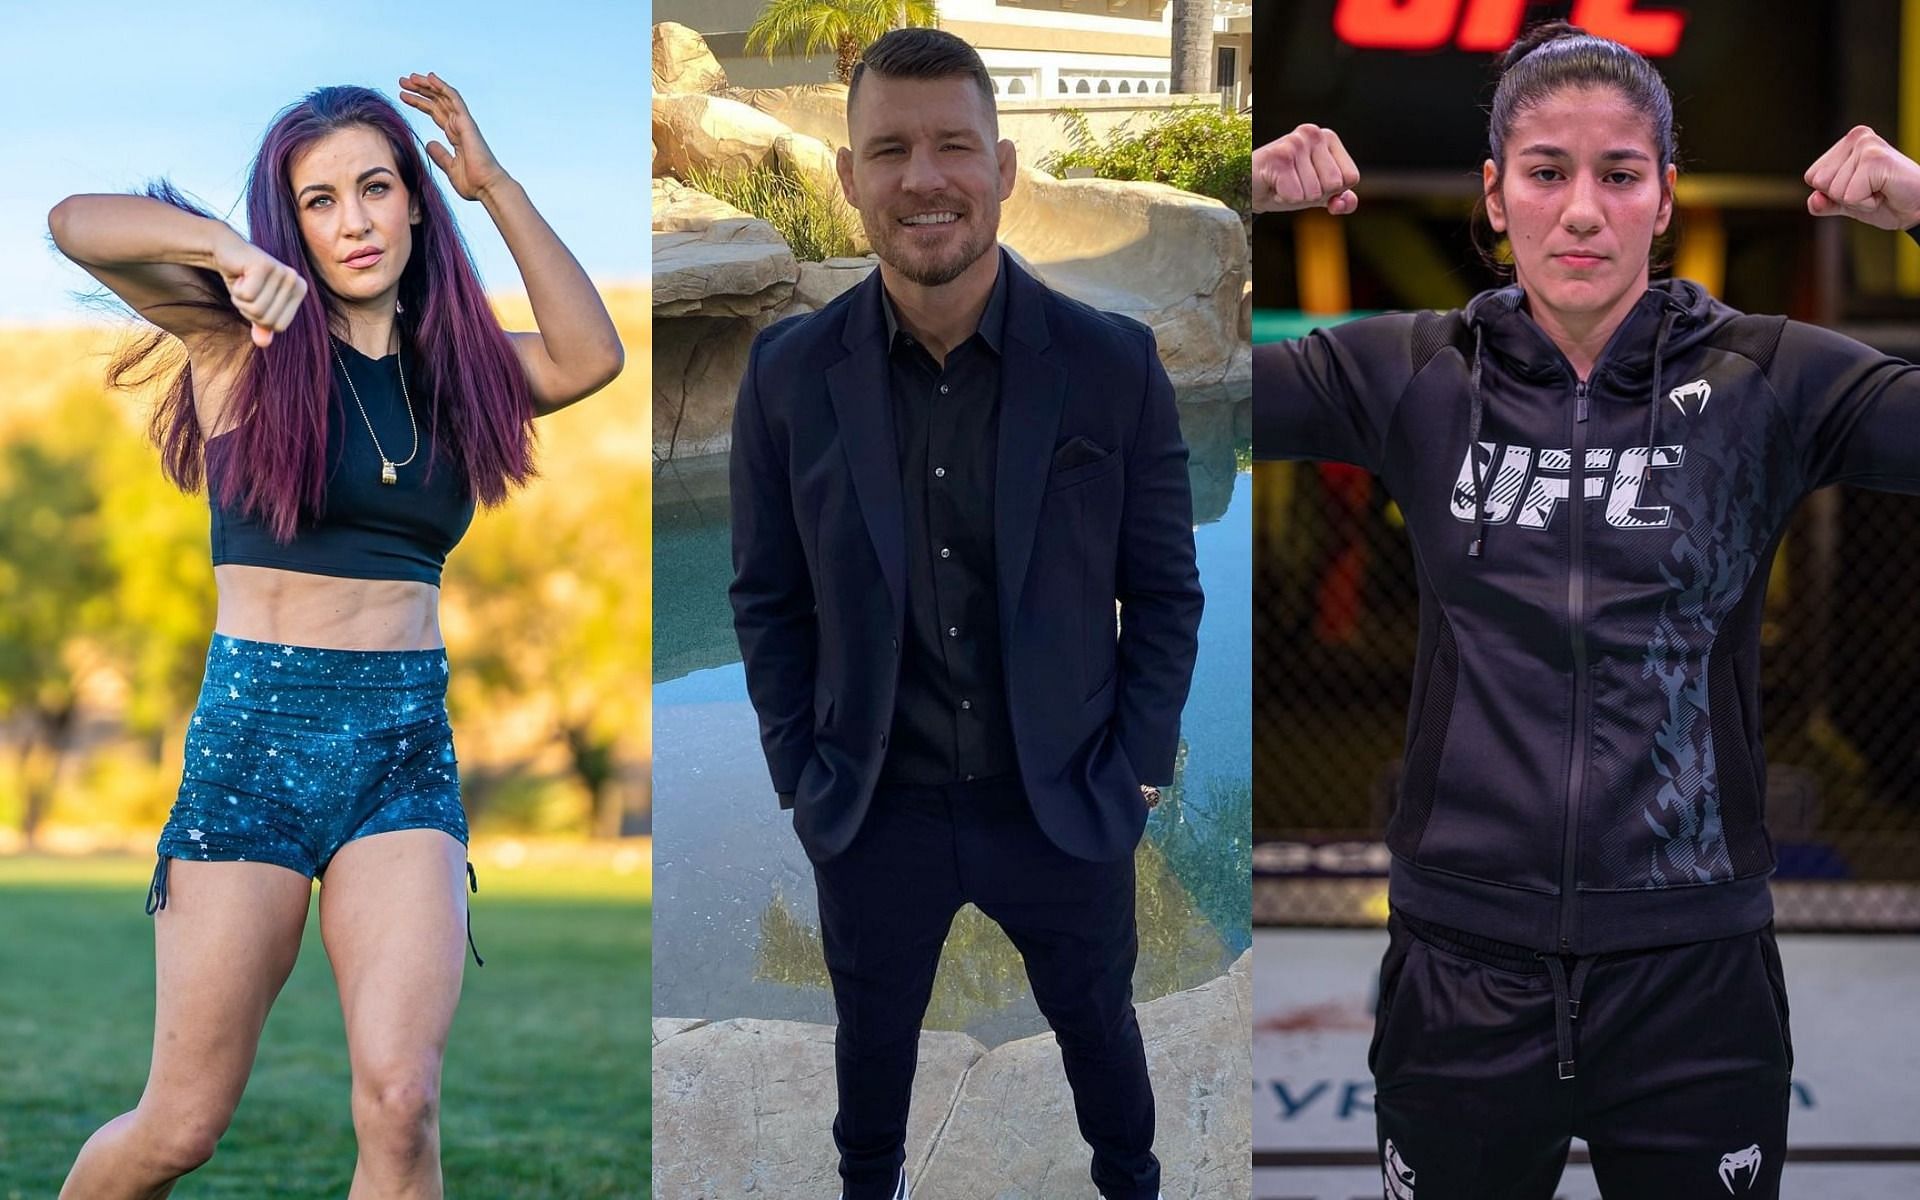 Miesha Tate (left), Michael Bisping (central), Ketlen Vieira (right) [Images Courtesy: @ufc @mikebisping on Instagram]